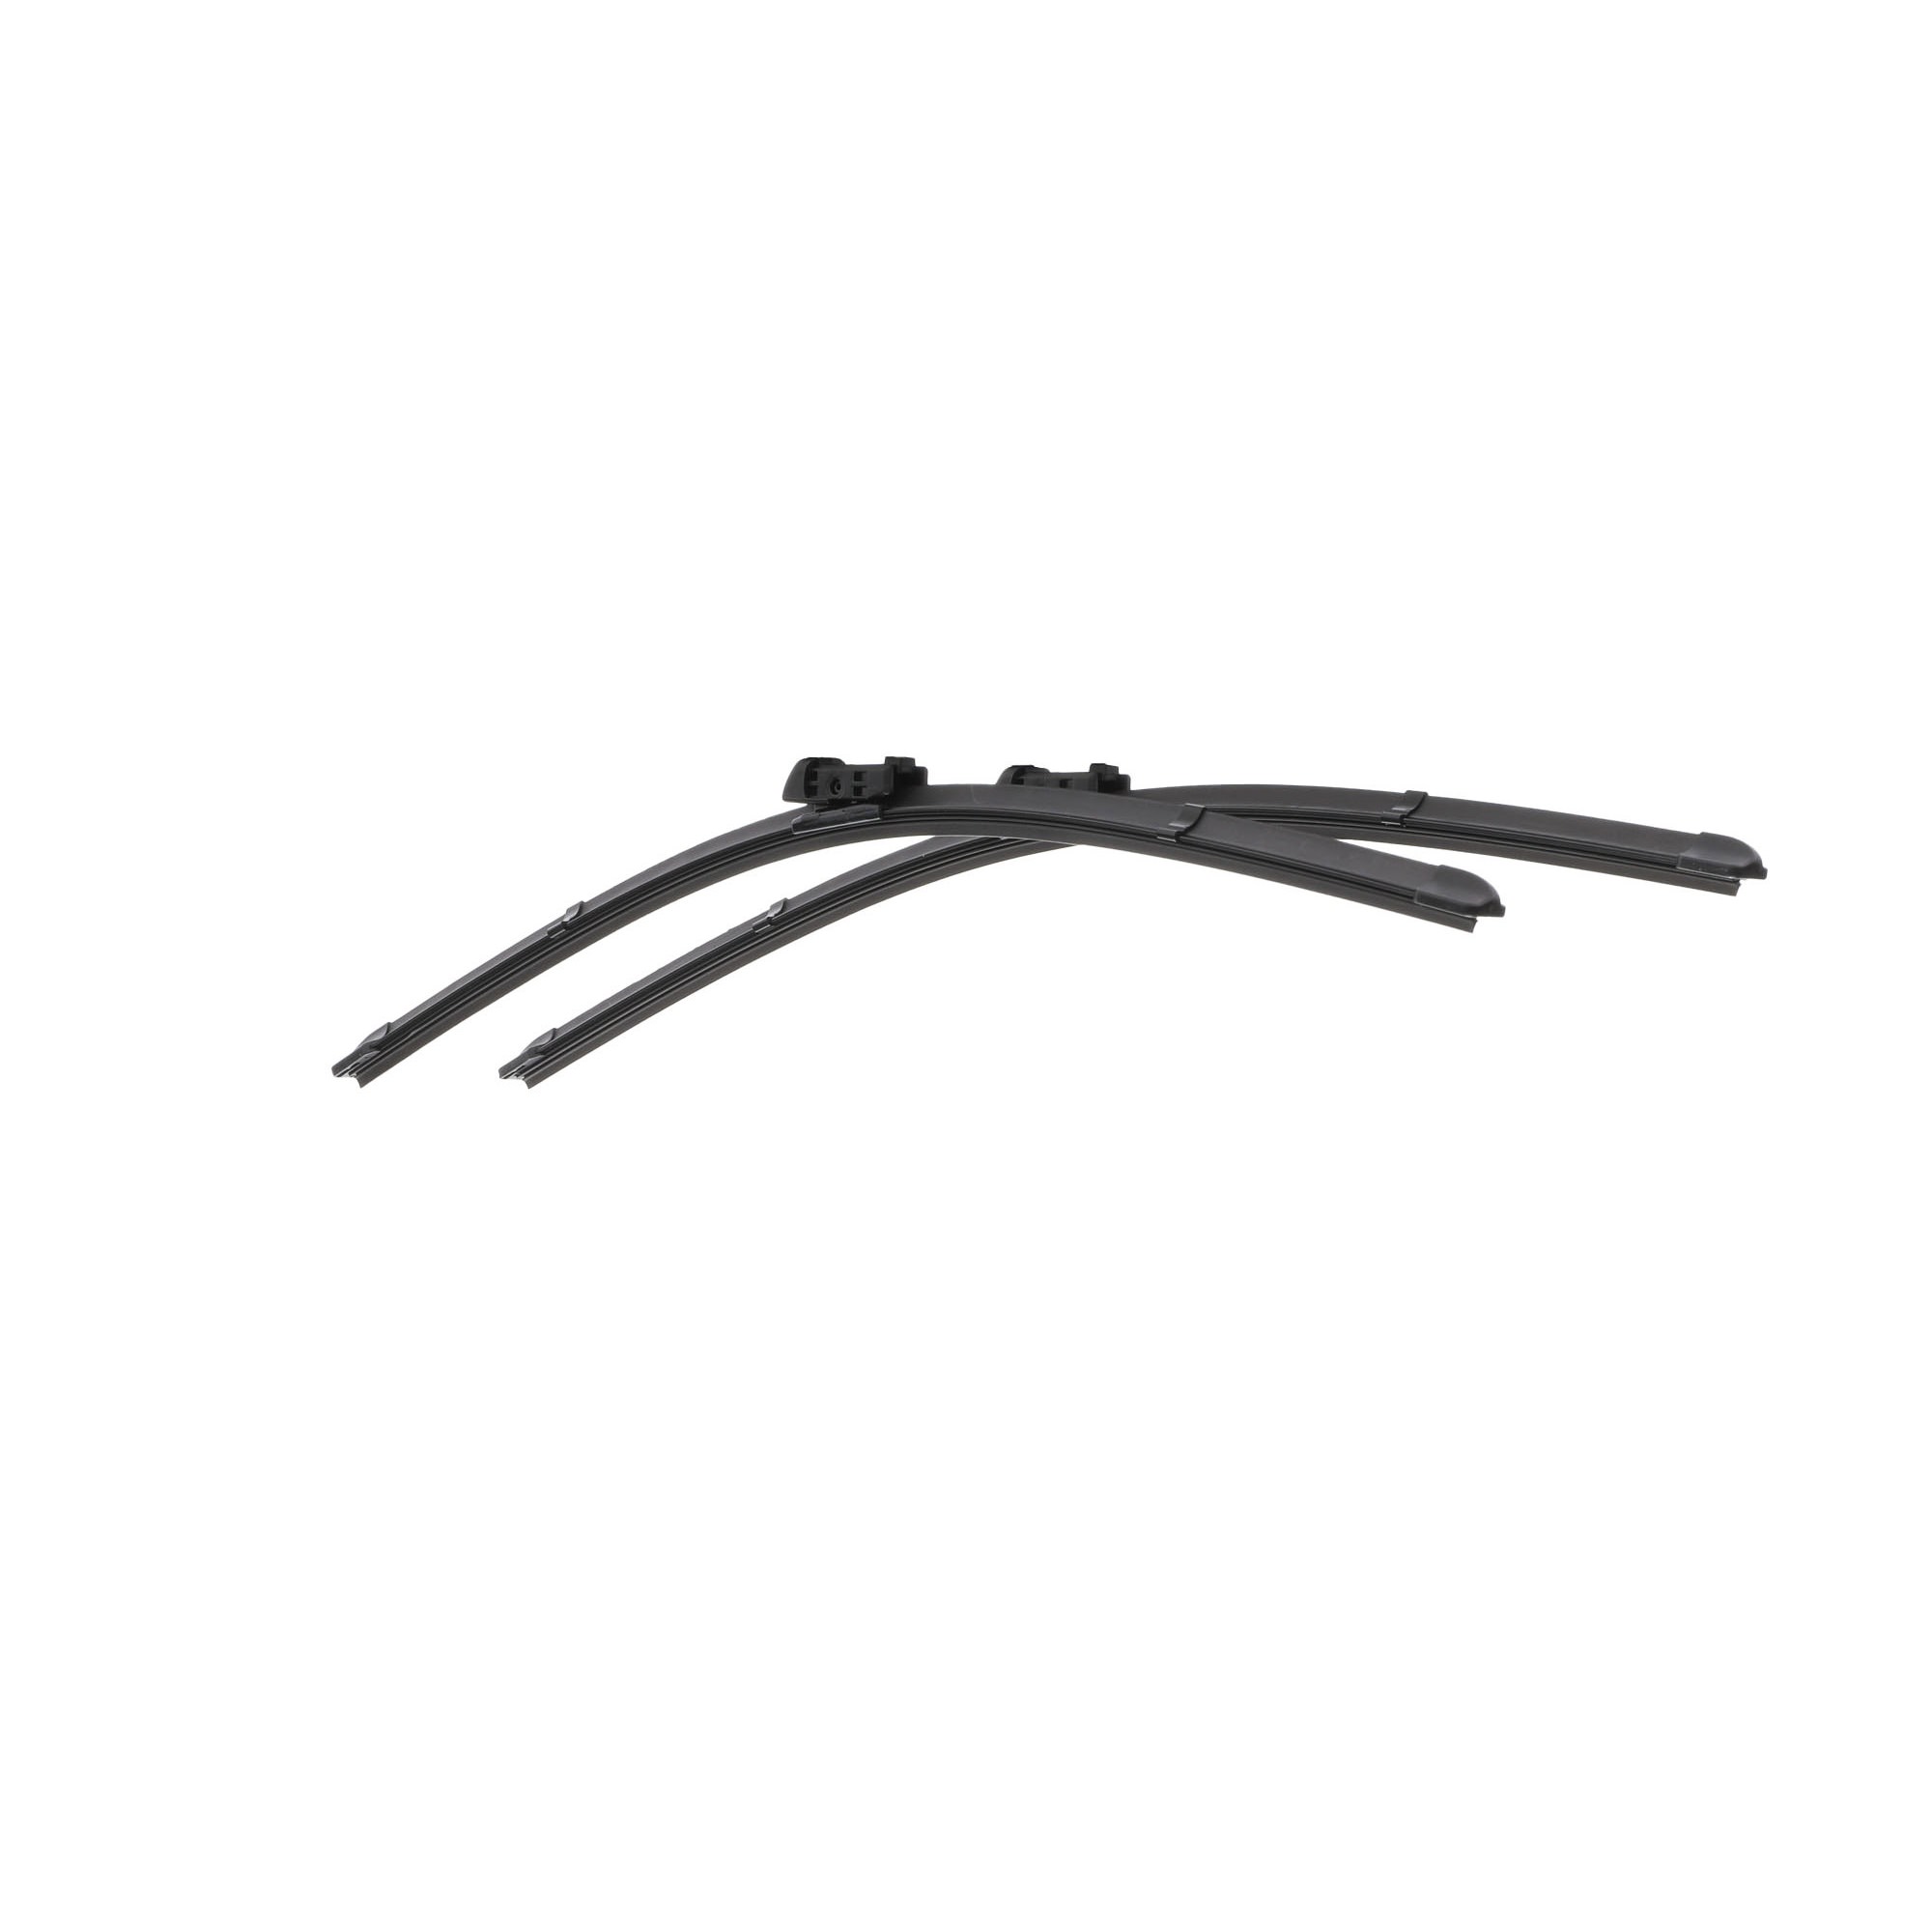 RIDEX 298W0469 Wiper blade 530, 575 mm, Beam, for left-hand drive vehicles